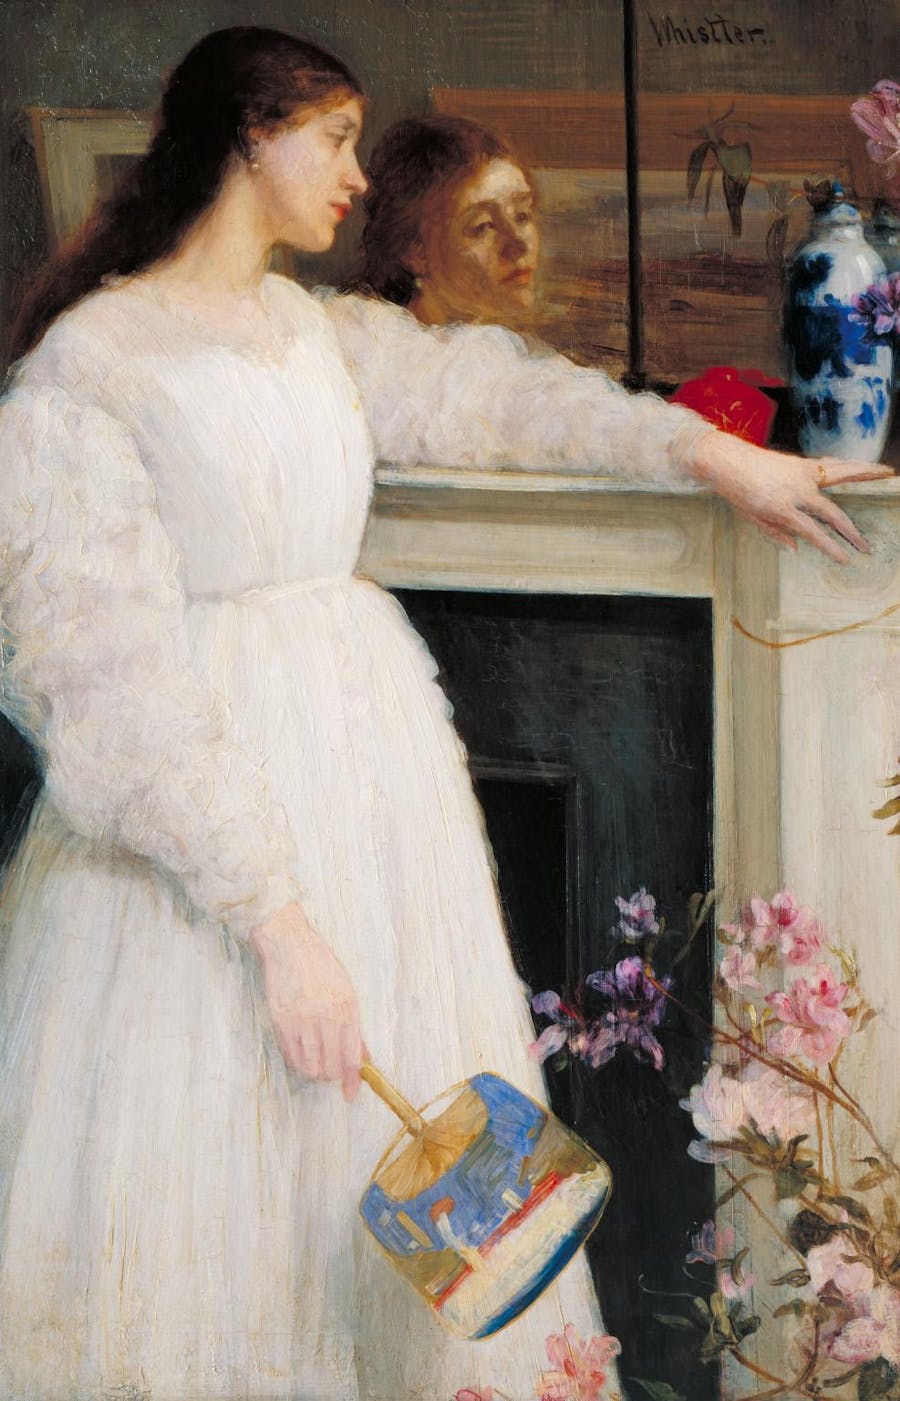 James Abbott McNeill Whistler, 'Symphony in White, No. 2: The Little White Girl', 1864-65, oil on canvas, 76 x 51 cm, Tate Britain, London. Photo public domain